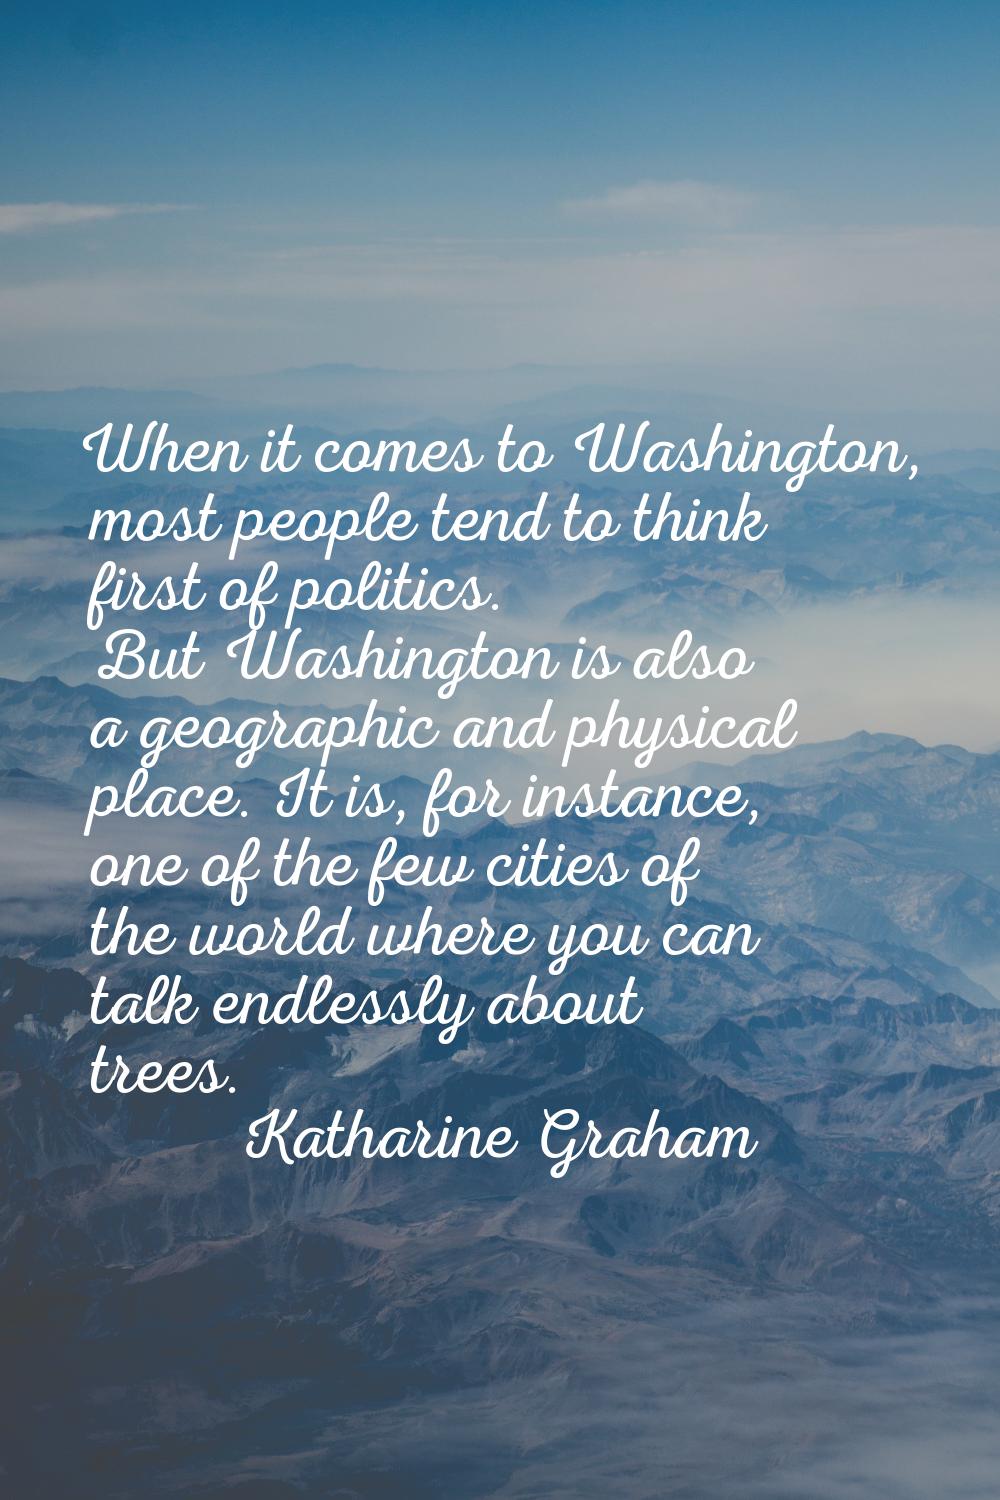 When it comes to Washington, most people tend to think first of politics. But Washington is also a 